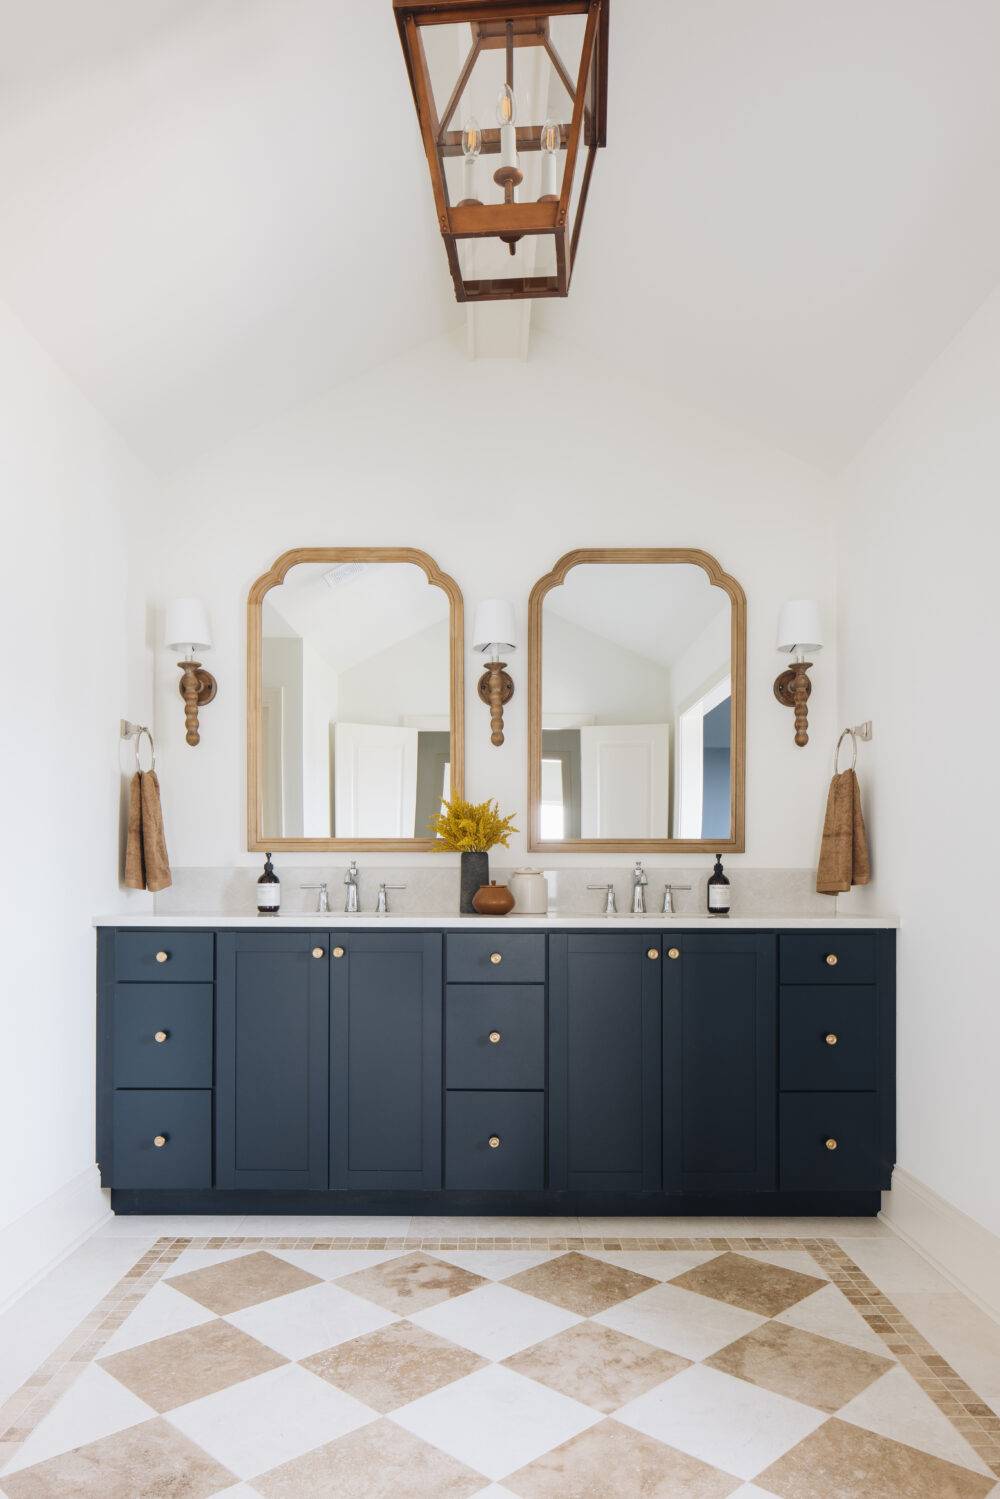 Bathroom with white and cream checkerboard patterned floor and blue sink vanity.